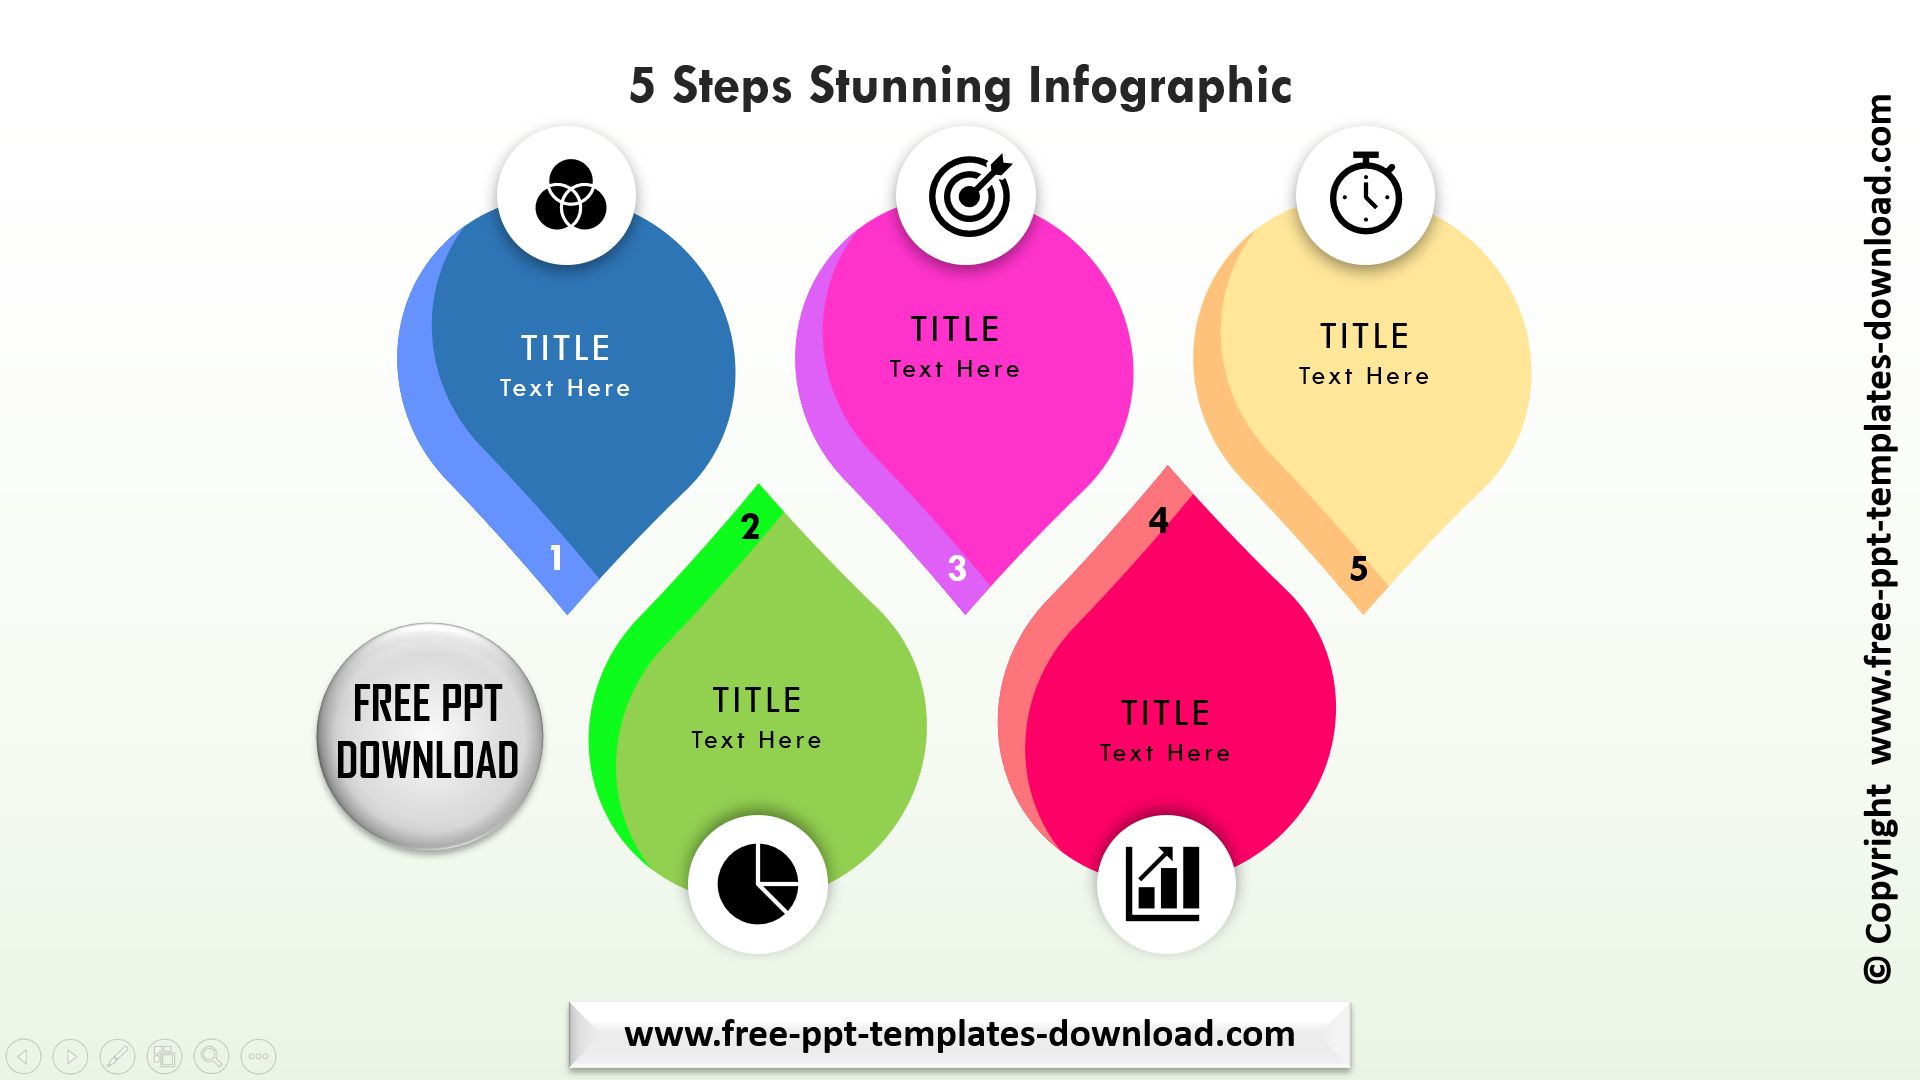 free-ppt-templates-download-on-linkedin-5-steps-stunning-infographic